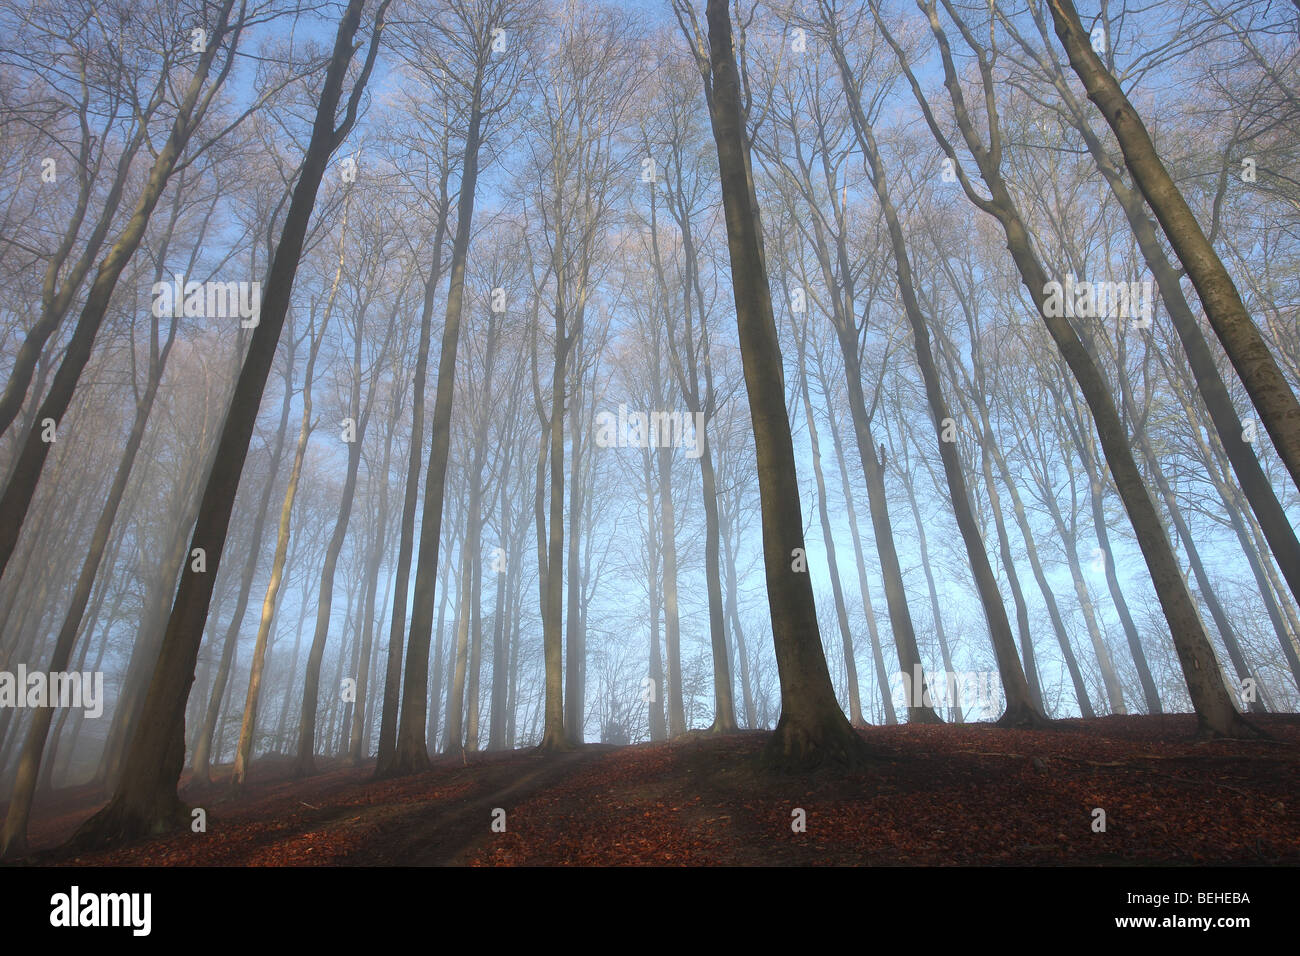 Beeches (Fagus sylvatica) in Beech forest, Flemish Ardennes, Belgium Stock Photo